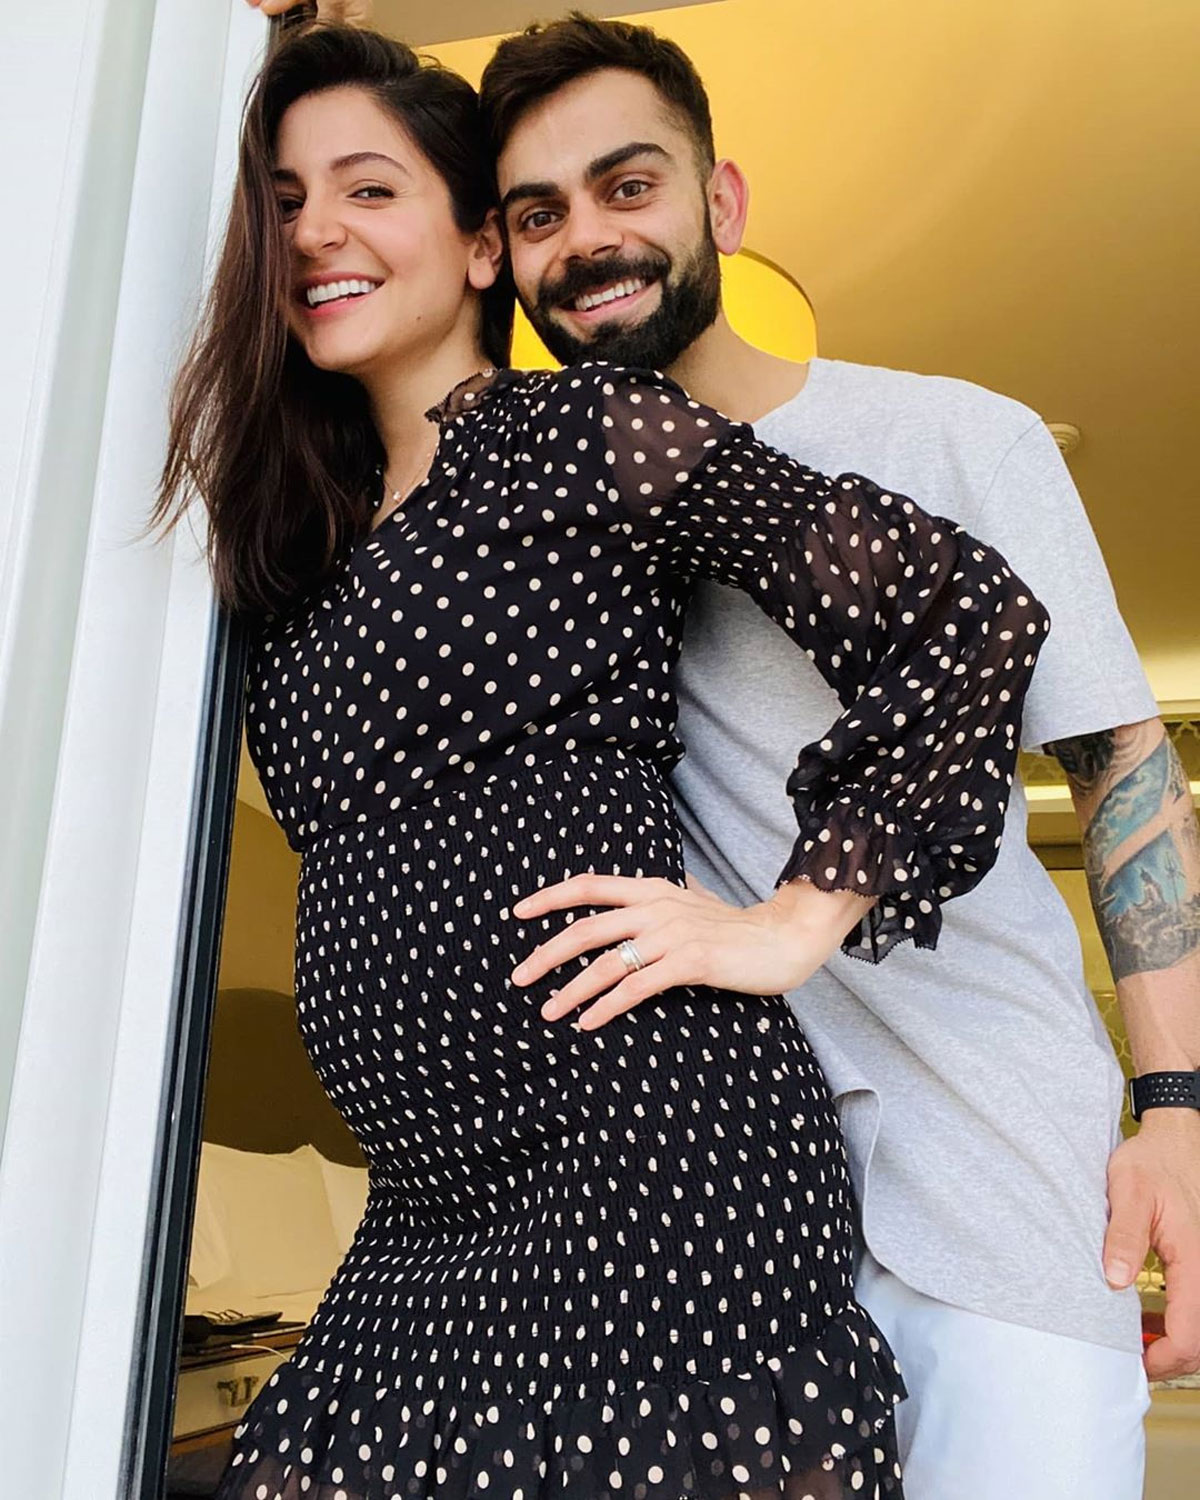 Expectant father Kohli might miss last two Aus Tests